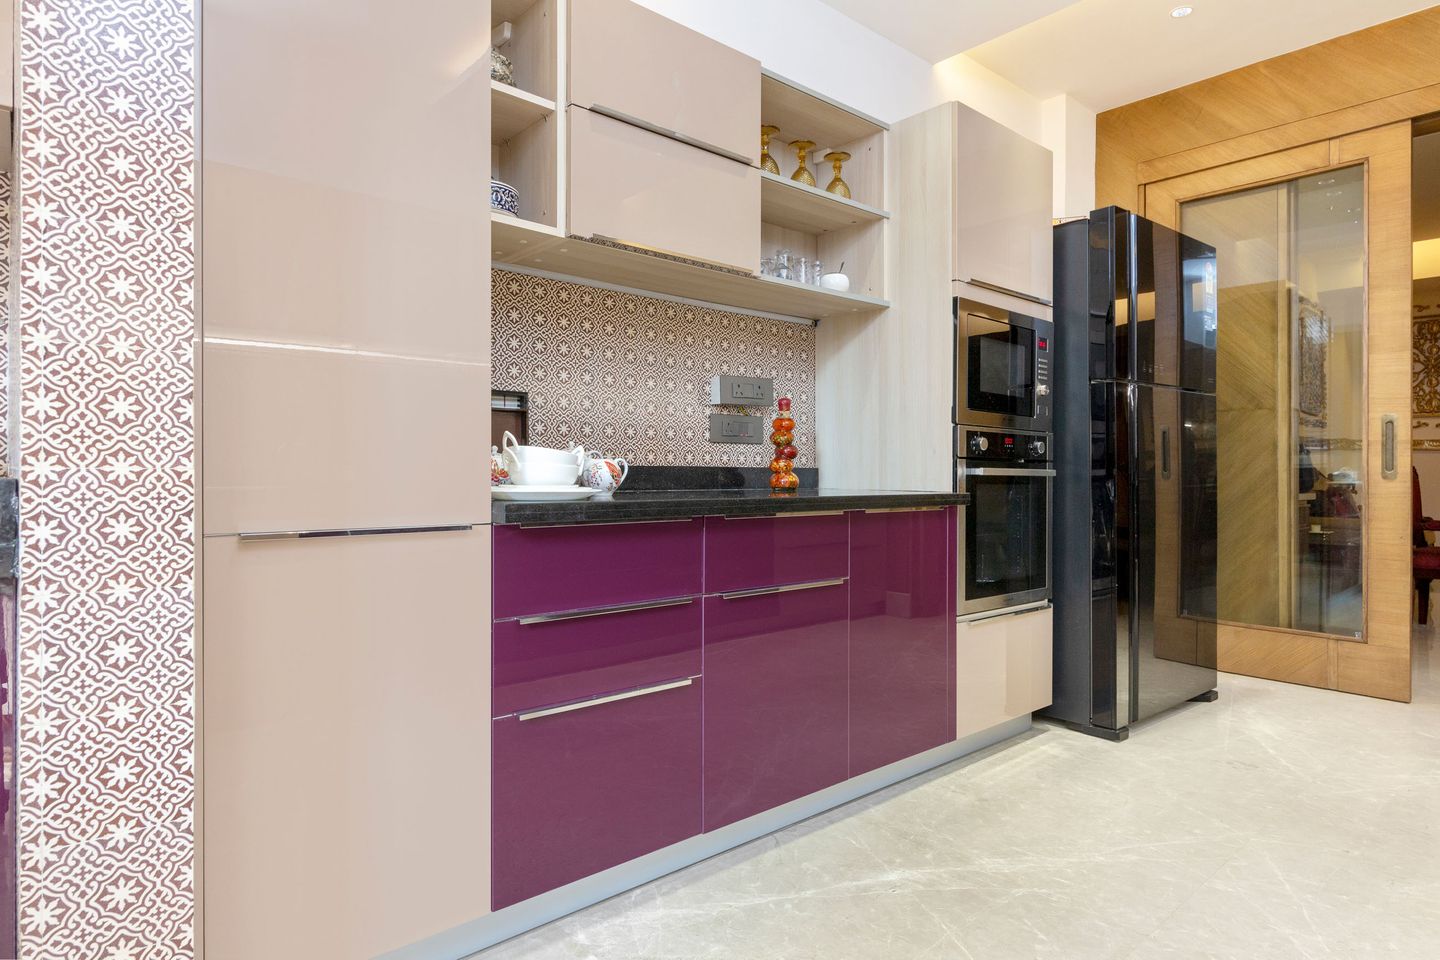 Parallel Beige And Purple Glossy Kitchen Design With OTG Unit - Livspace